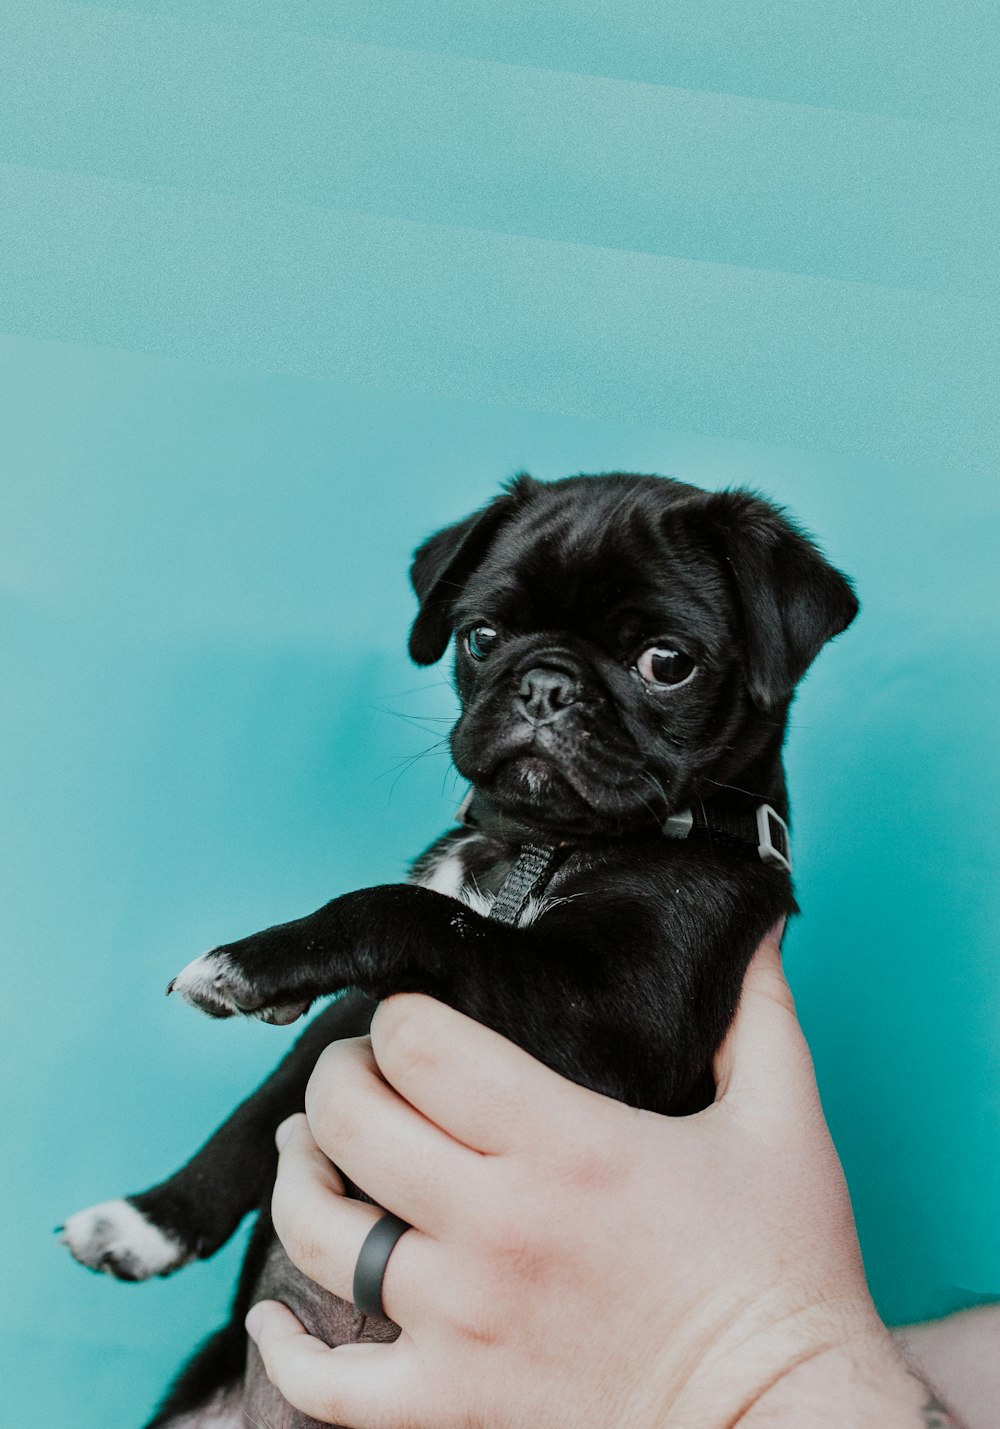 black pug puppy on persons hand